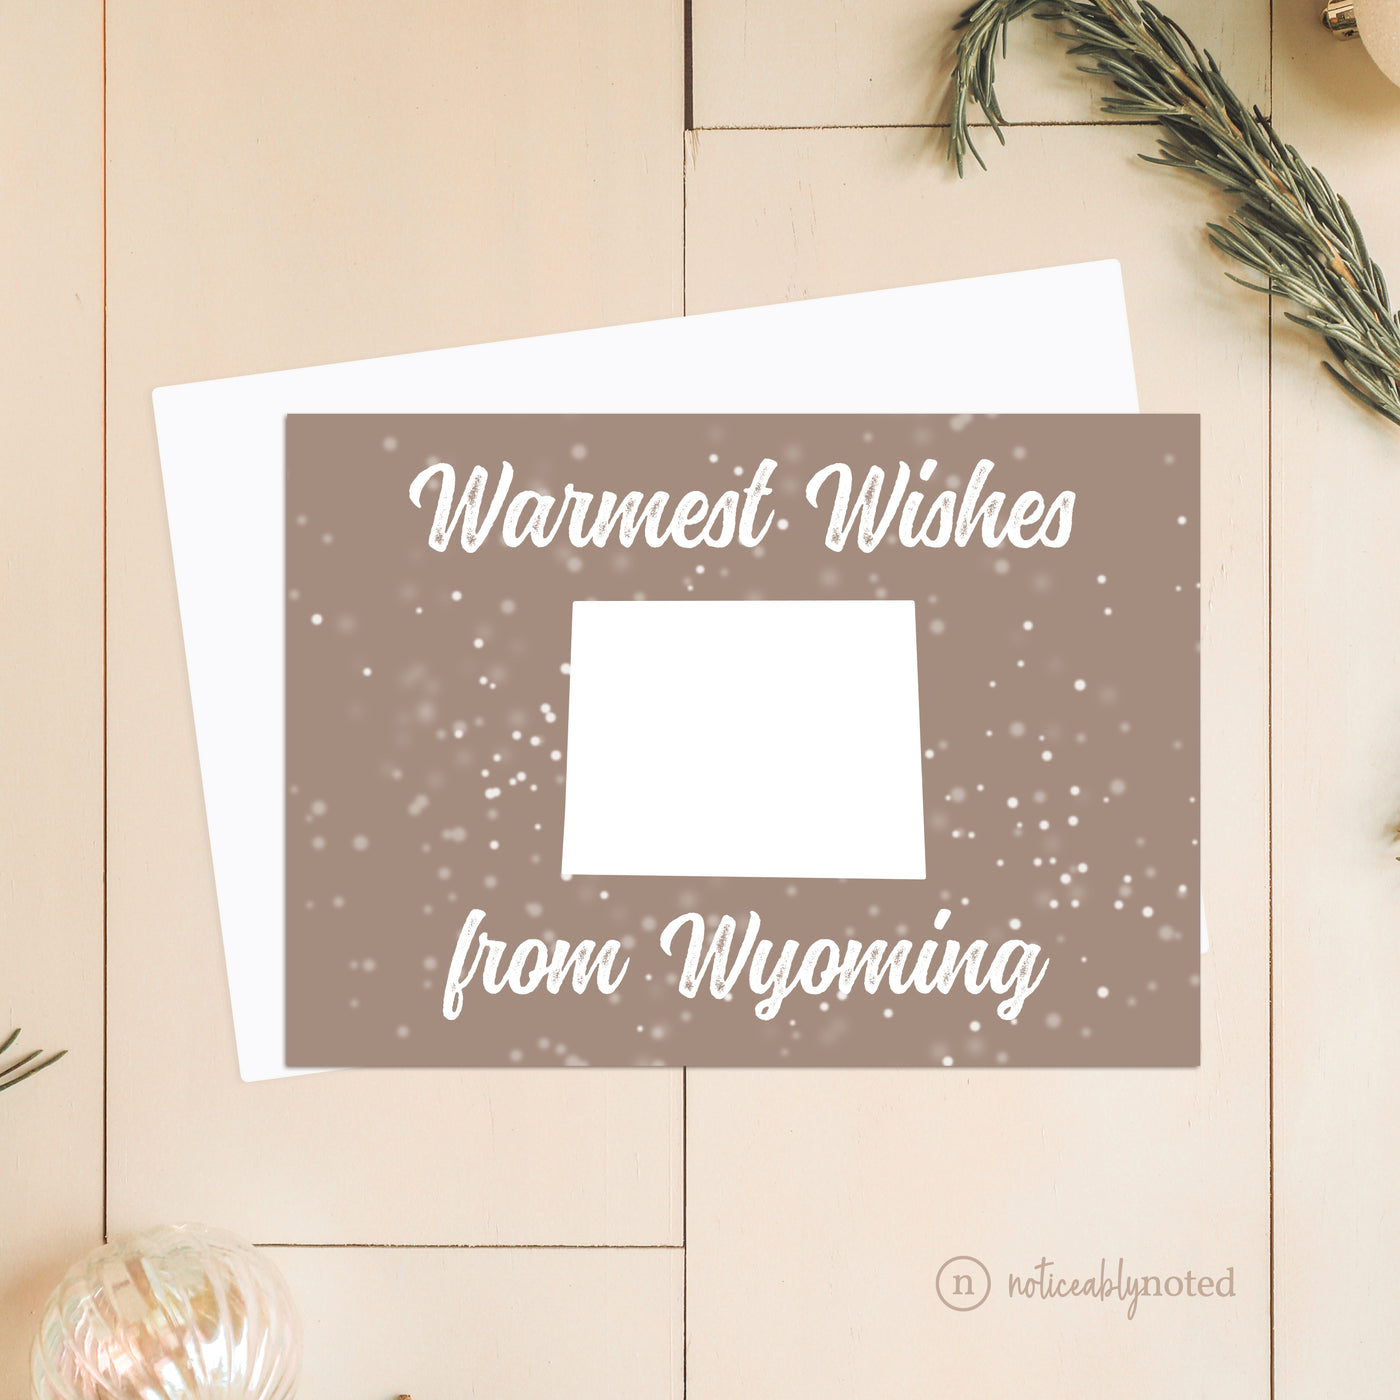 WY Holiday Greeting Cards | Noticeably Noted